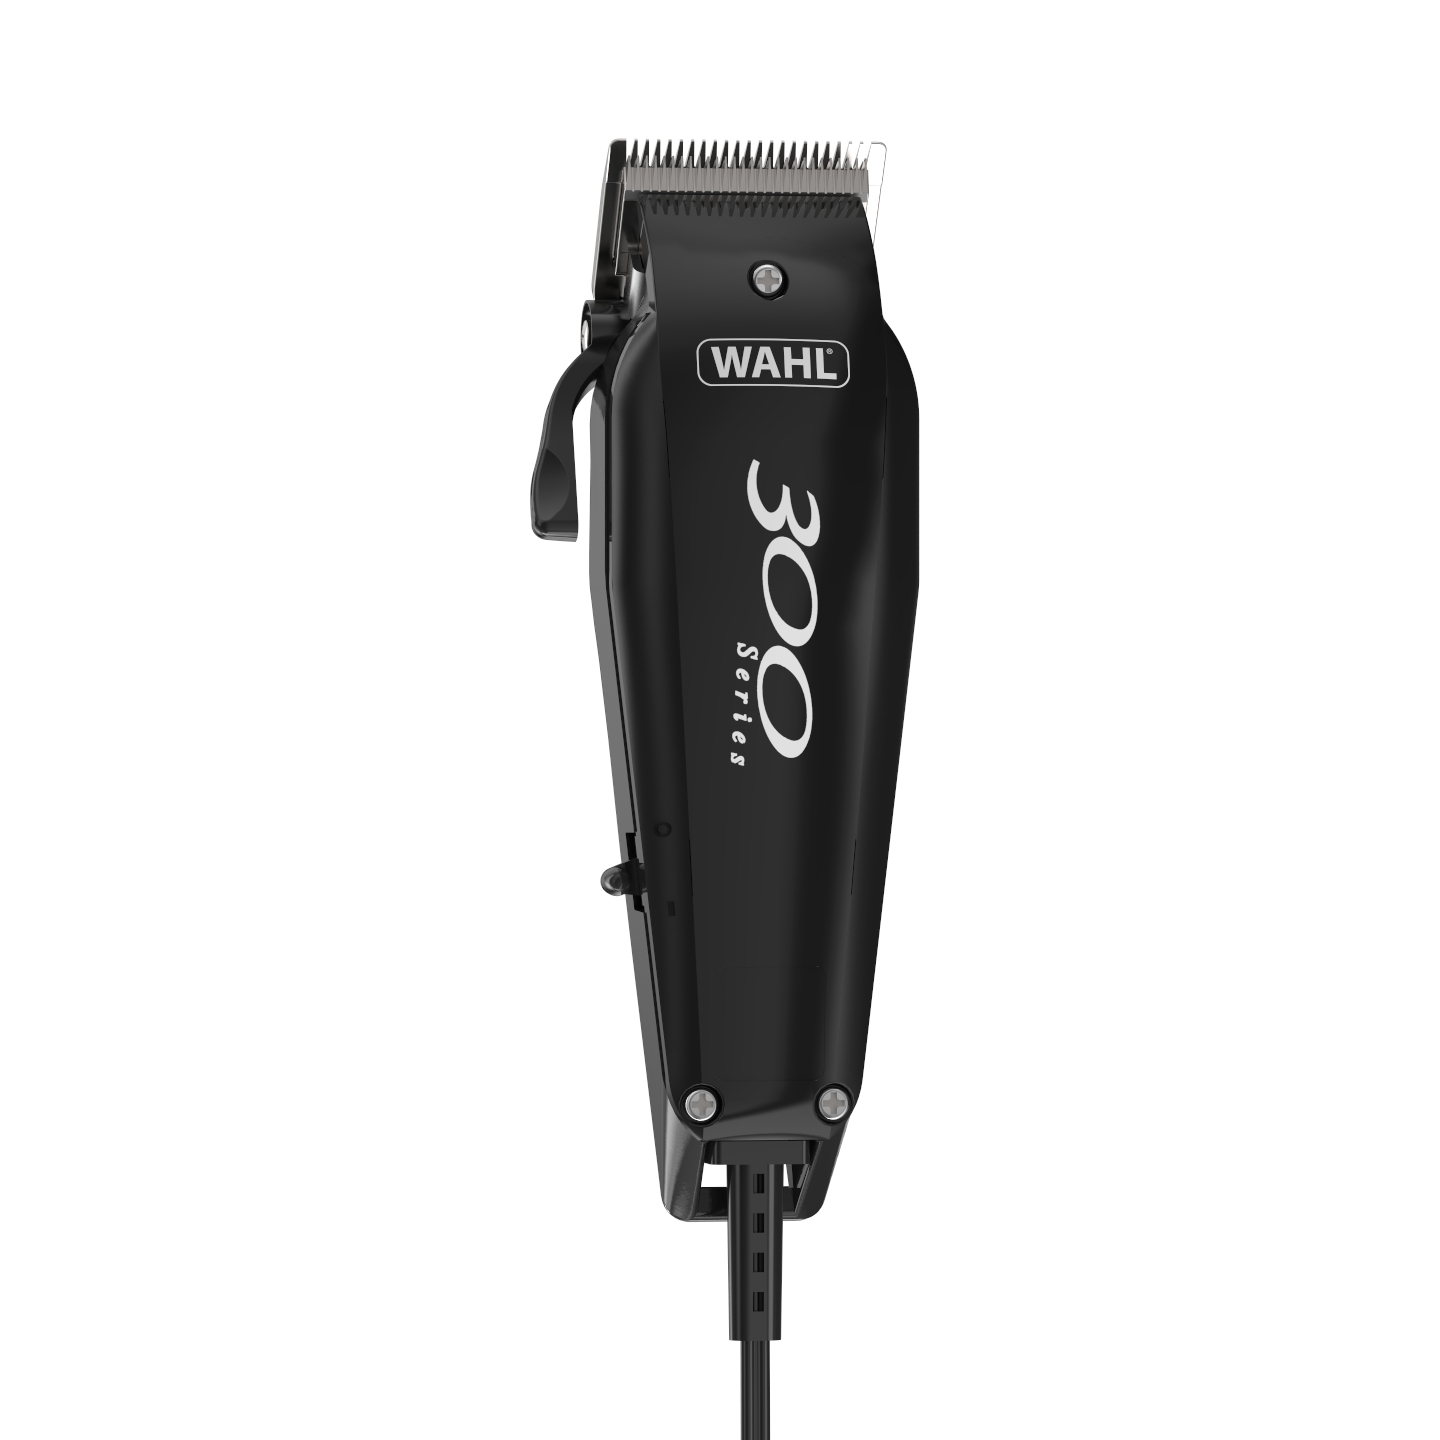 wahl 300 series review